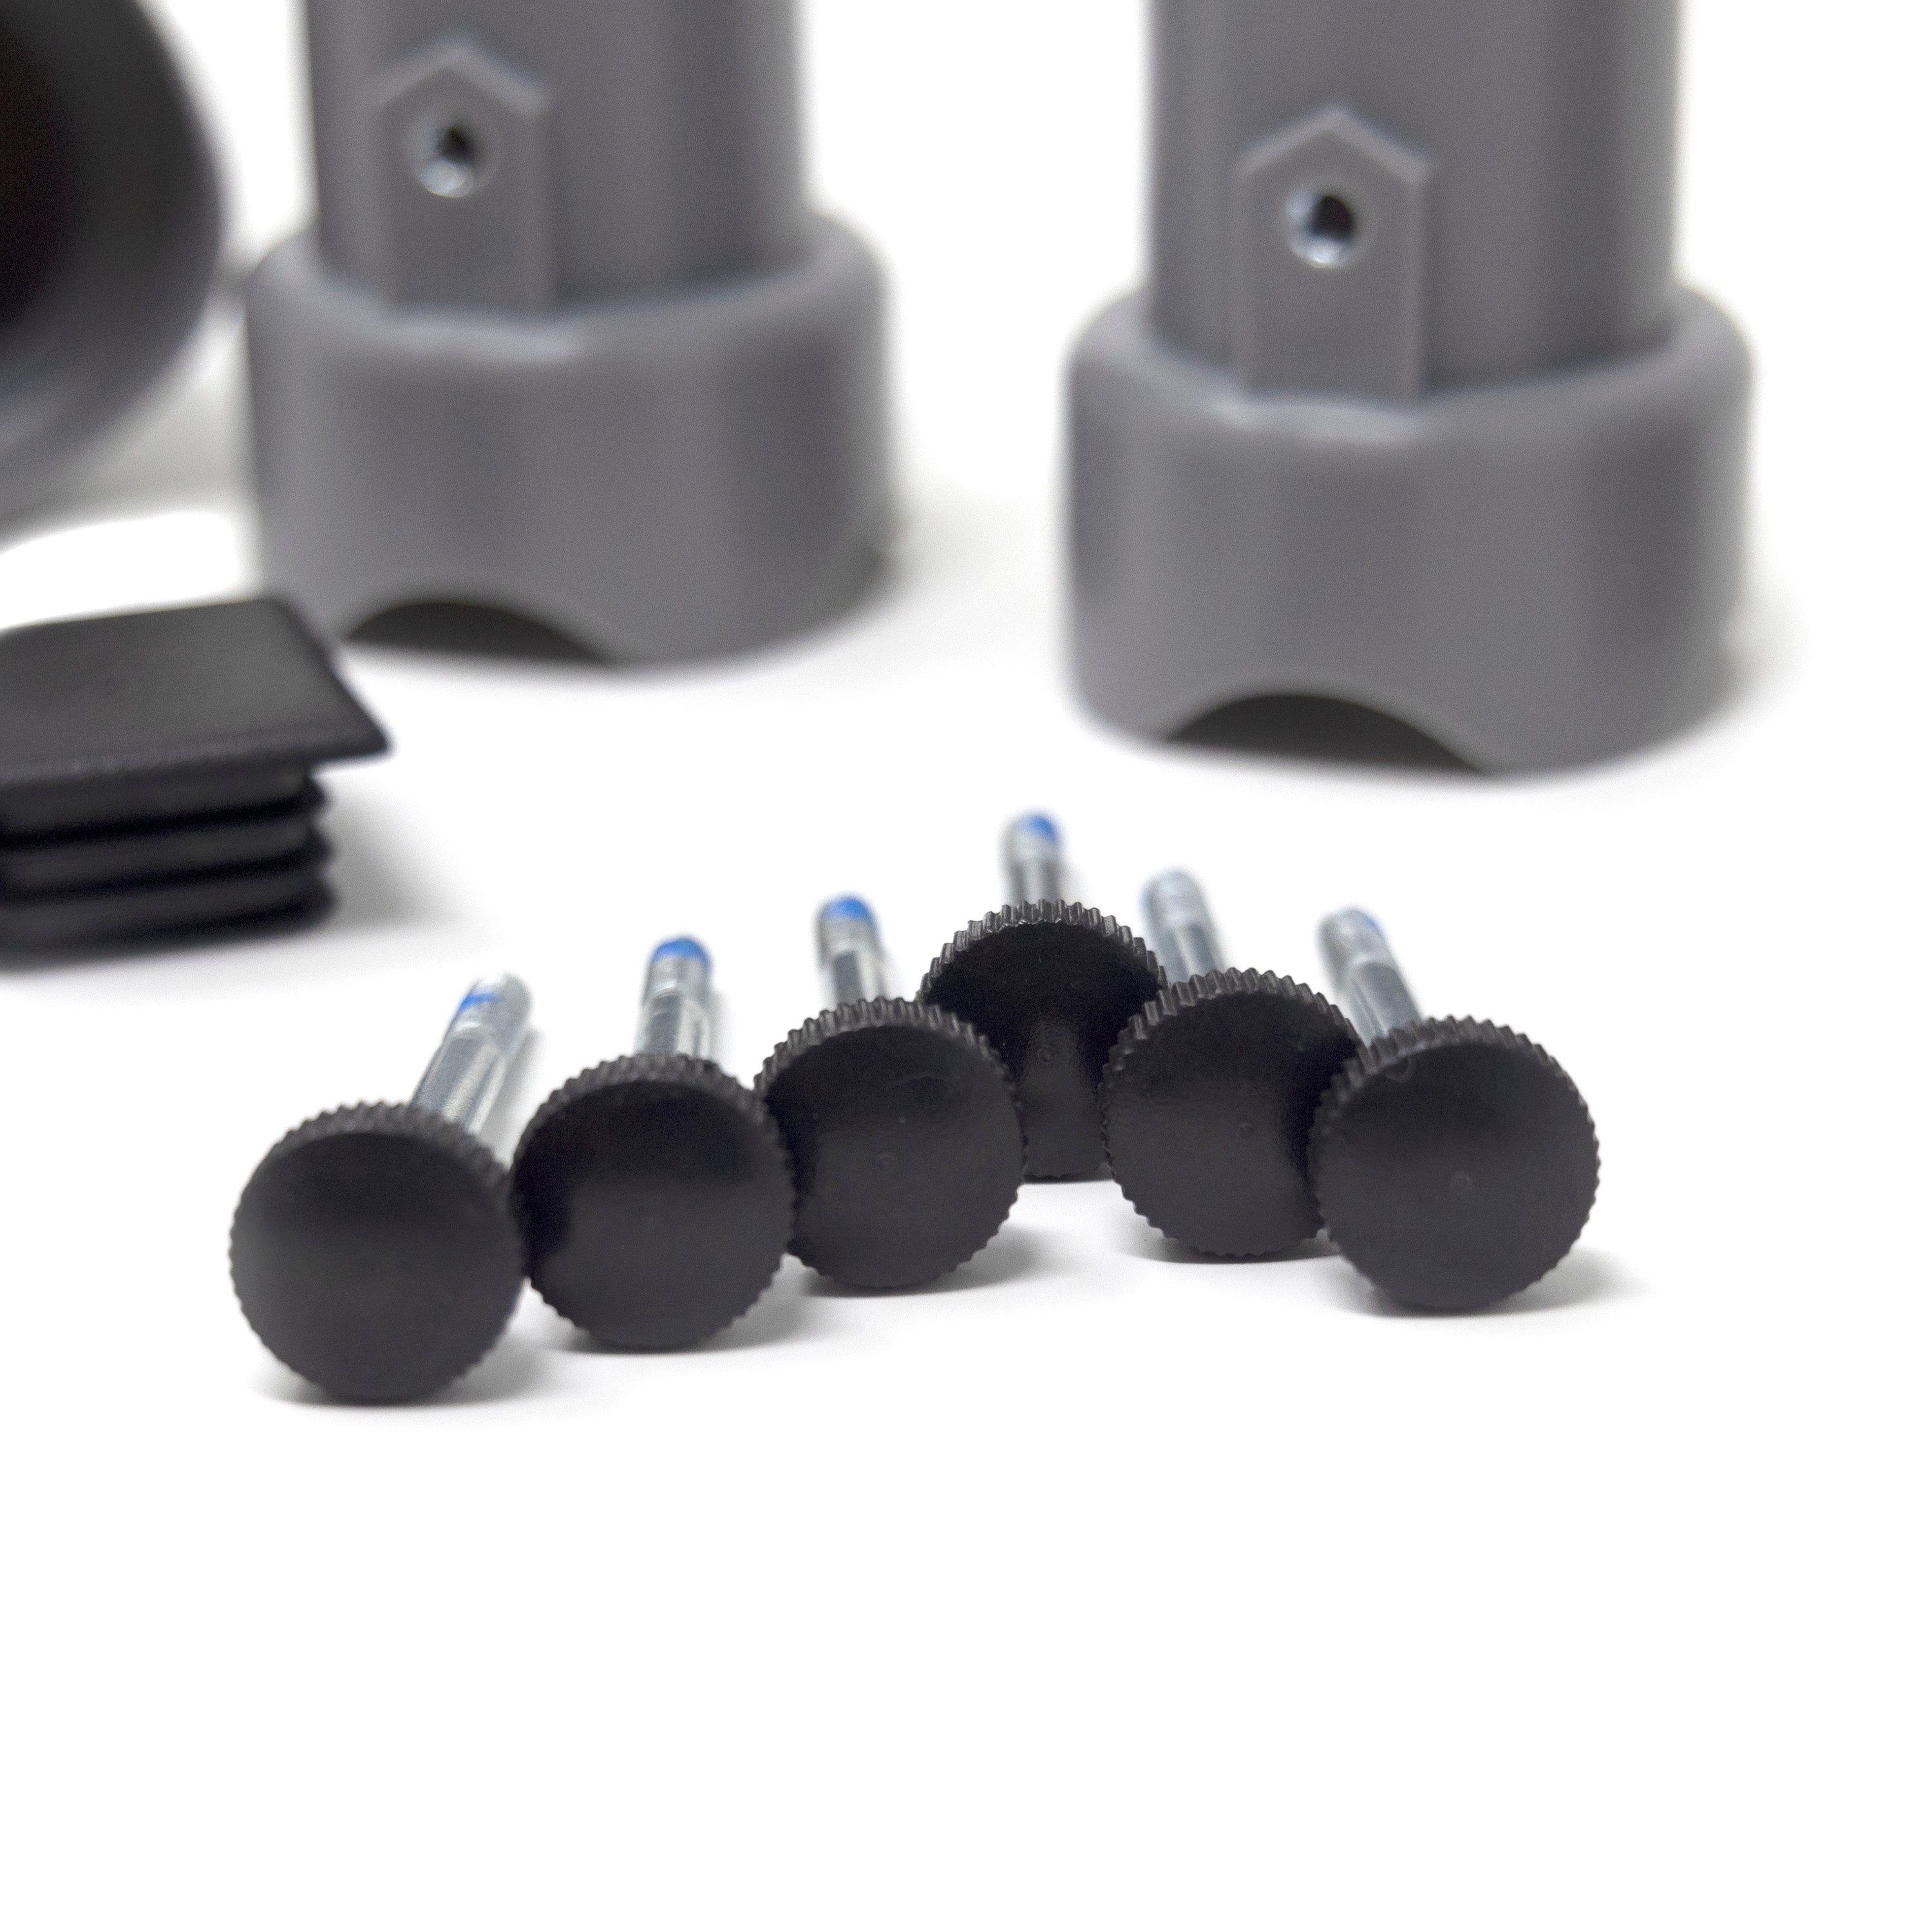 Large Grey Pole Cap Kit with Bolts and End Caps (Set of 6) 8049, 1016, 8003